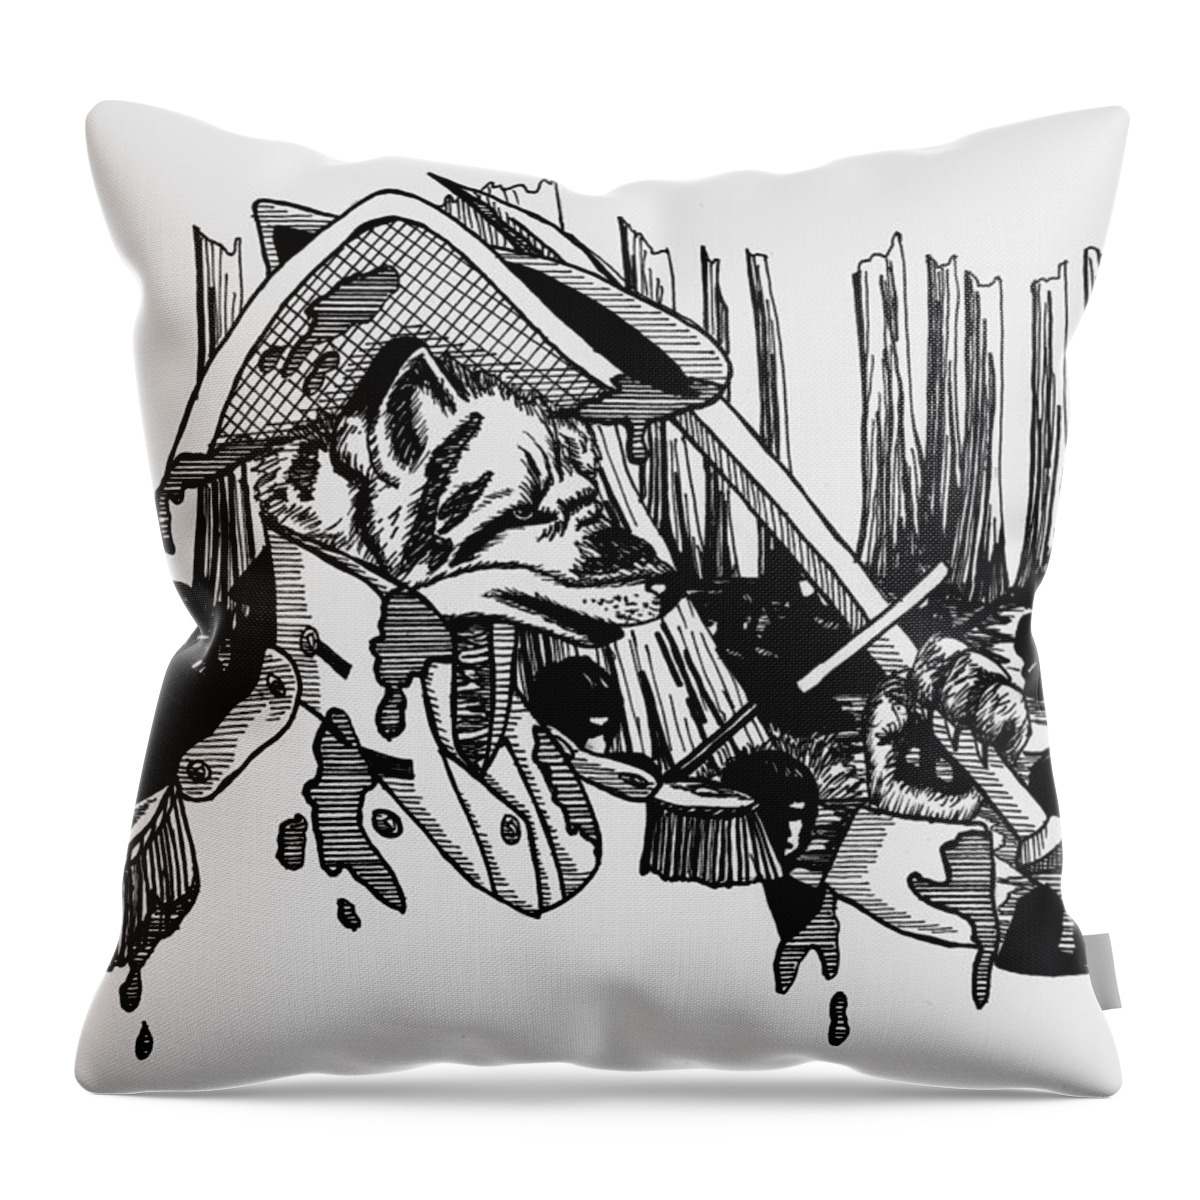 Swamp Fox Throw Pillow featuring the drawing Swamp Fox by Scarlett Royale